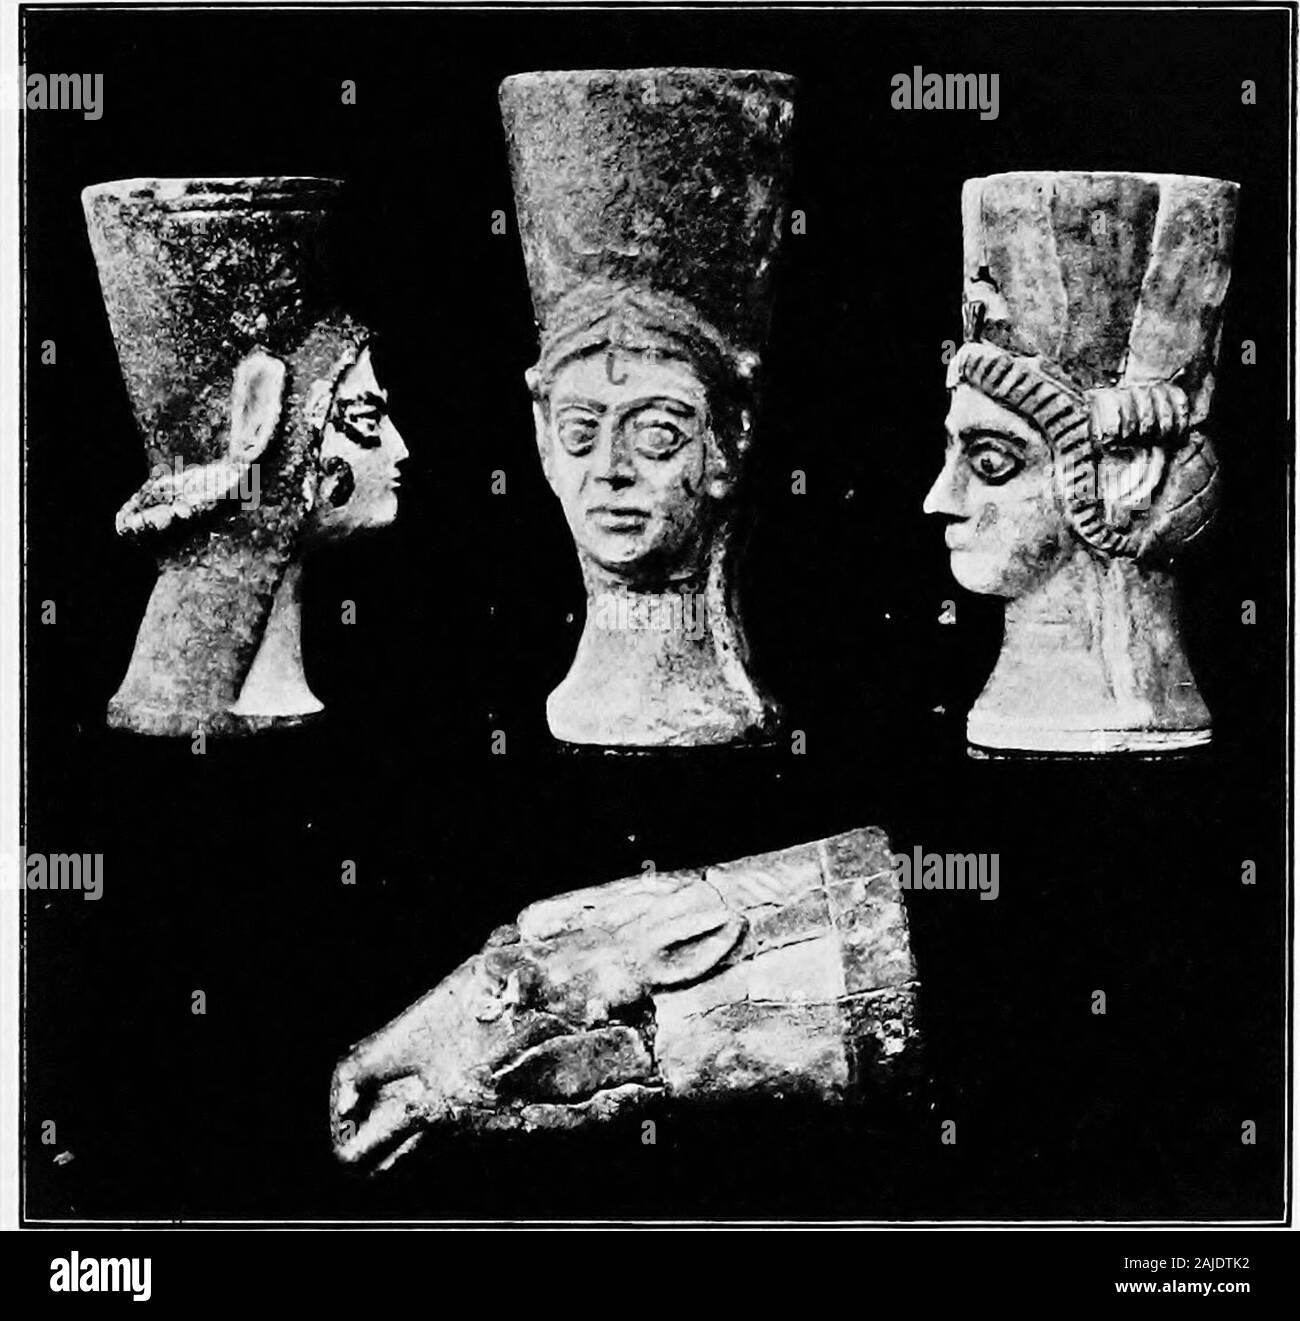 Ægean archæeology; an introduction to the archæeology of prehistoric Greece . Fig. 35.—Cyprus ; late Mycenaean Fig. 36.—Crete; Hird-cup krater from Enkomi. Brilish Palaikastro (L.M.III). IMuseum. Scale y^j-. two distinct periods, of which the earlier belongs to thebeginning, the later to the end, of the Mycenaean age.That the earlier objects are all heirlooms is hardlypossible. The tombs of Enkomi mark the easternmost extensionof the pure Minoan-Mycenaean culture. Recent ex-cavations in Palestine have brought to light thereremains of a sub-Mycenaean art, whose pottery isdebased L.M.III. Ordina Stock Photo